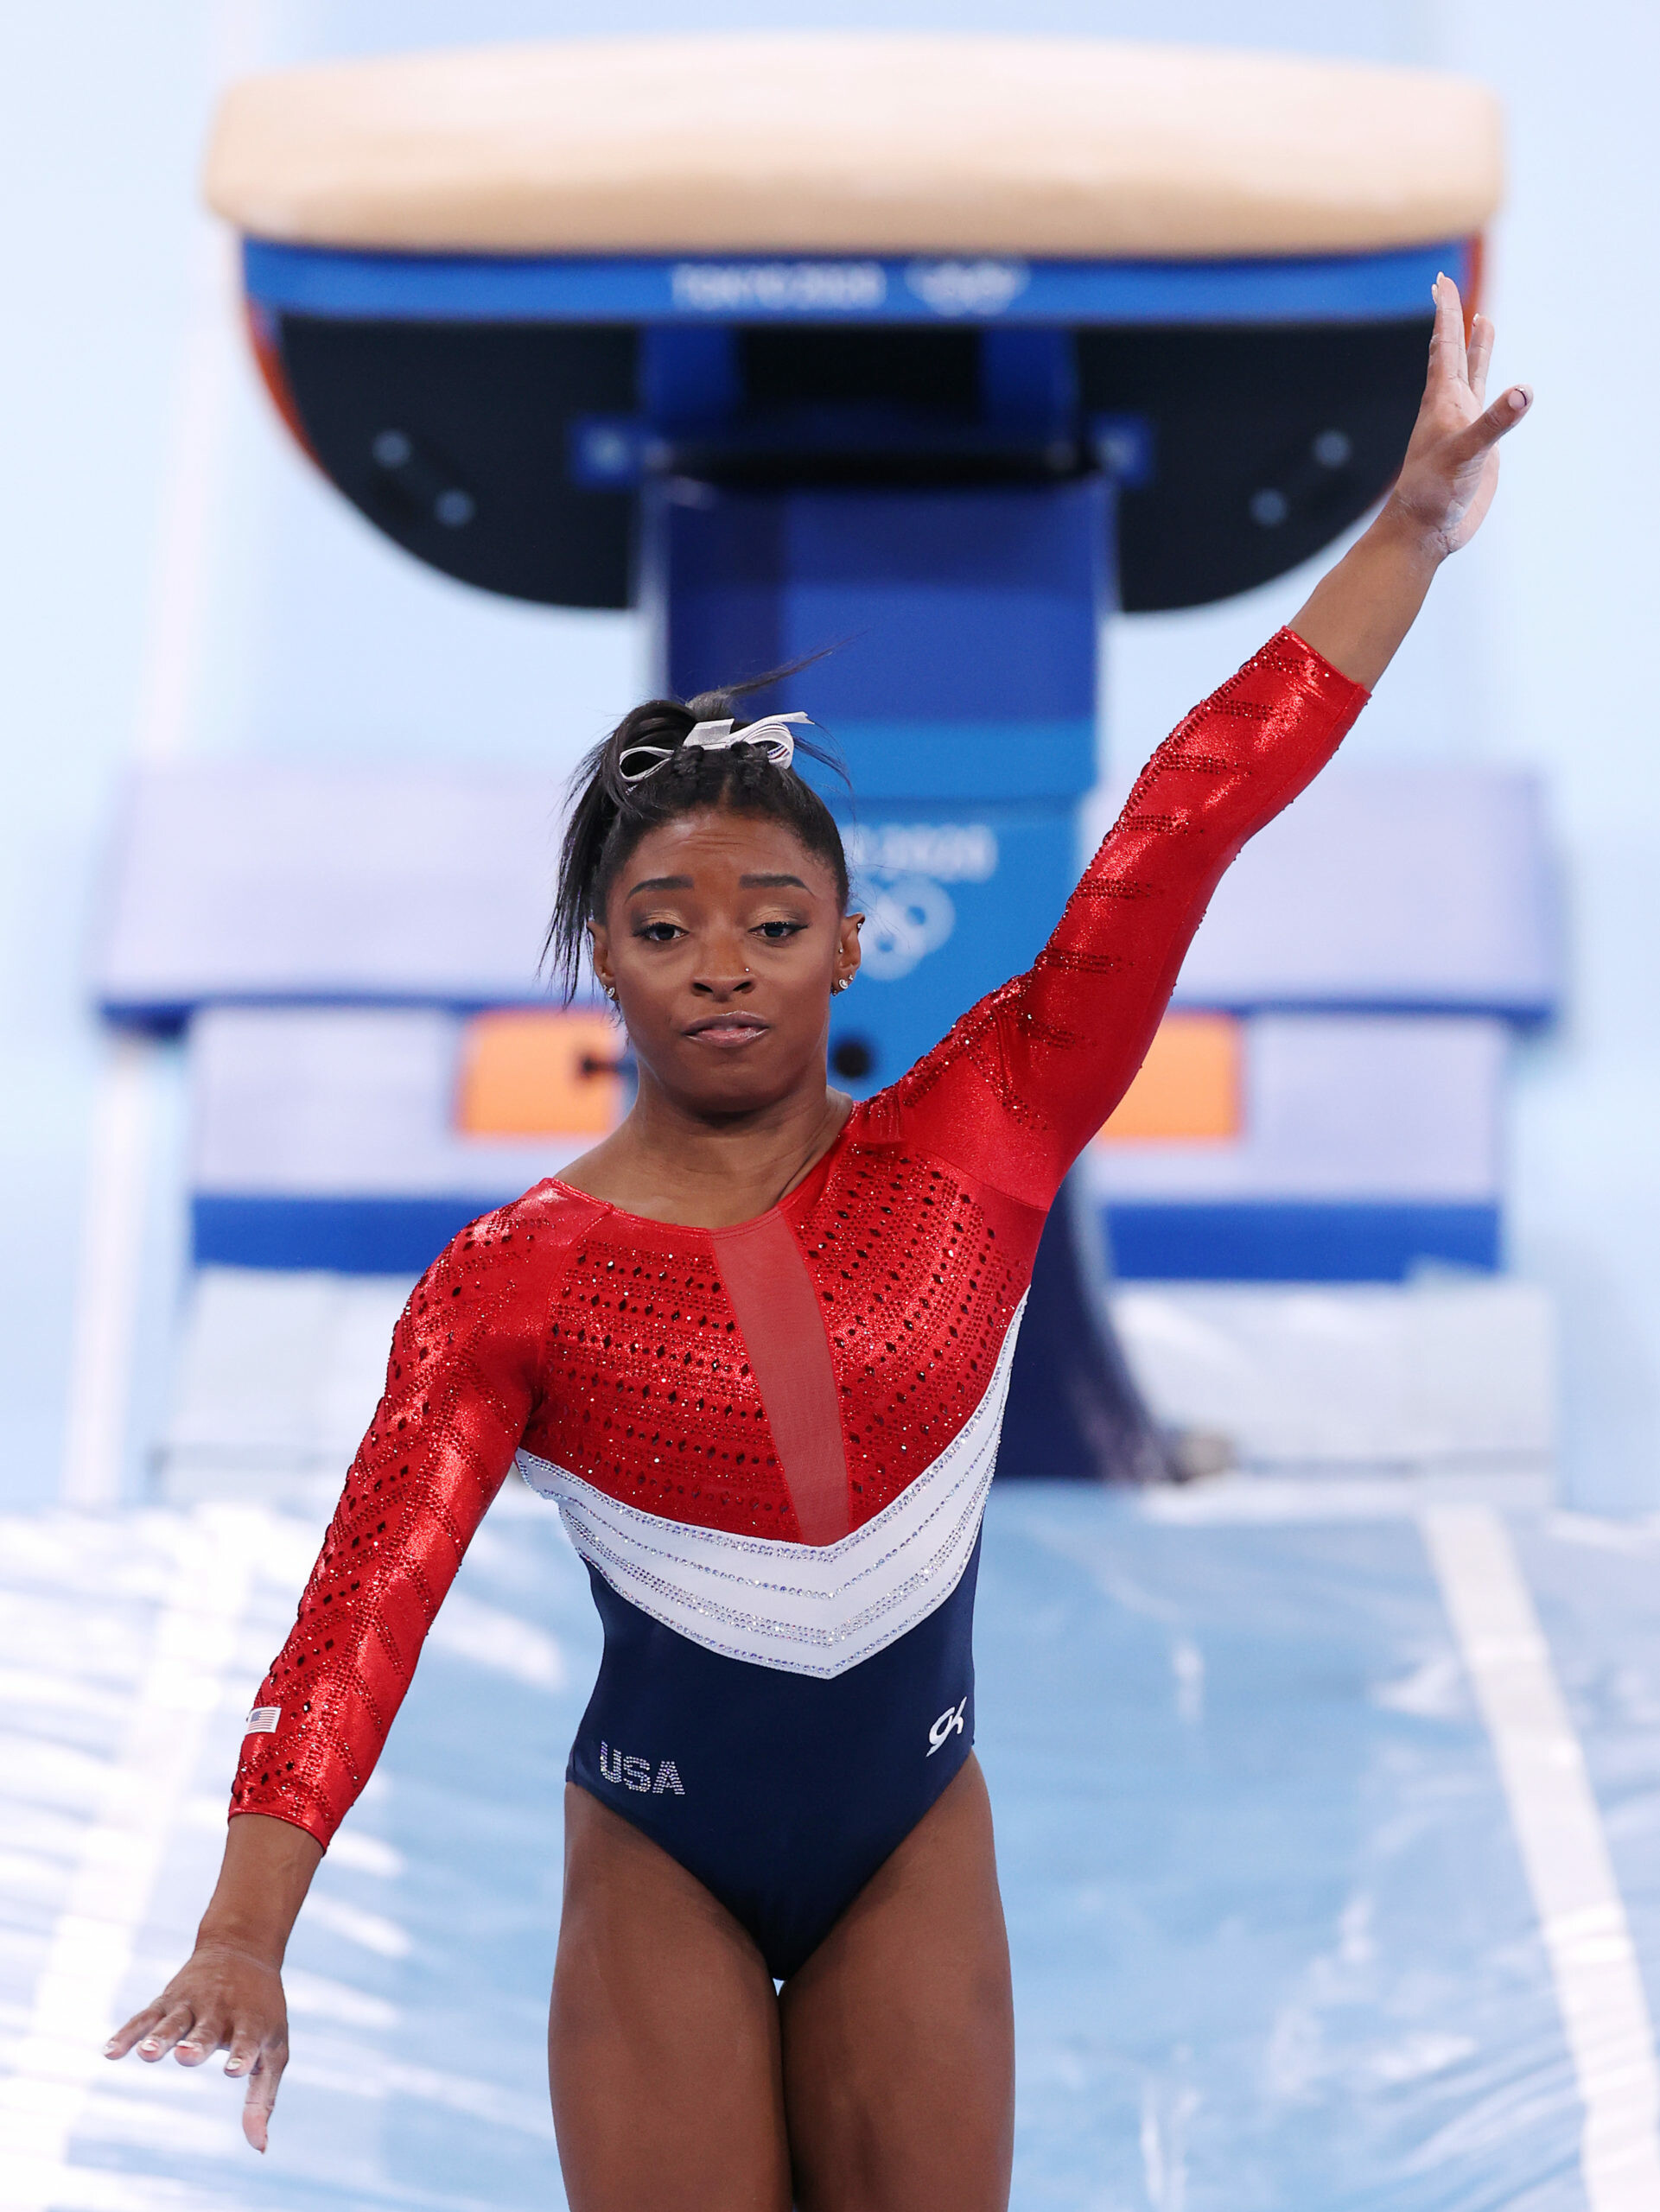 Simone Biles: An American Artistic Gymnast, Pulled Out Of Team Finals at Tokyo Olympics. 1930x2560 HD Wallpaper.